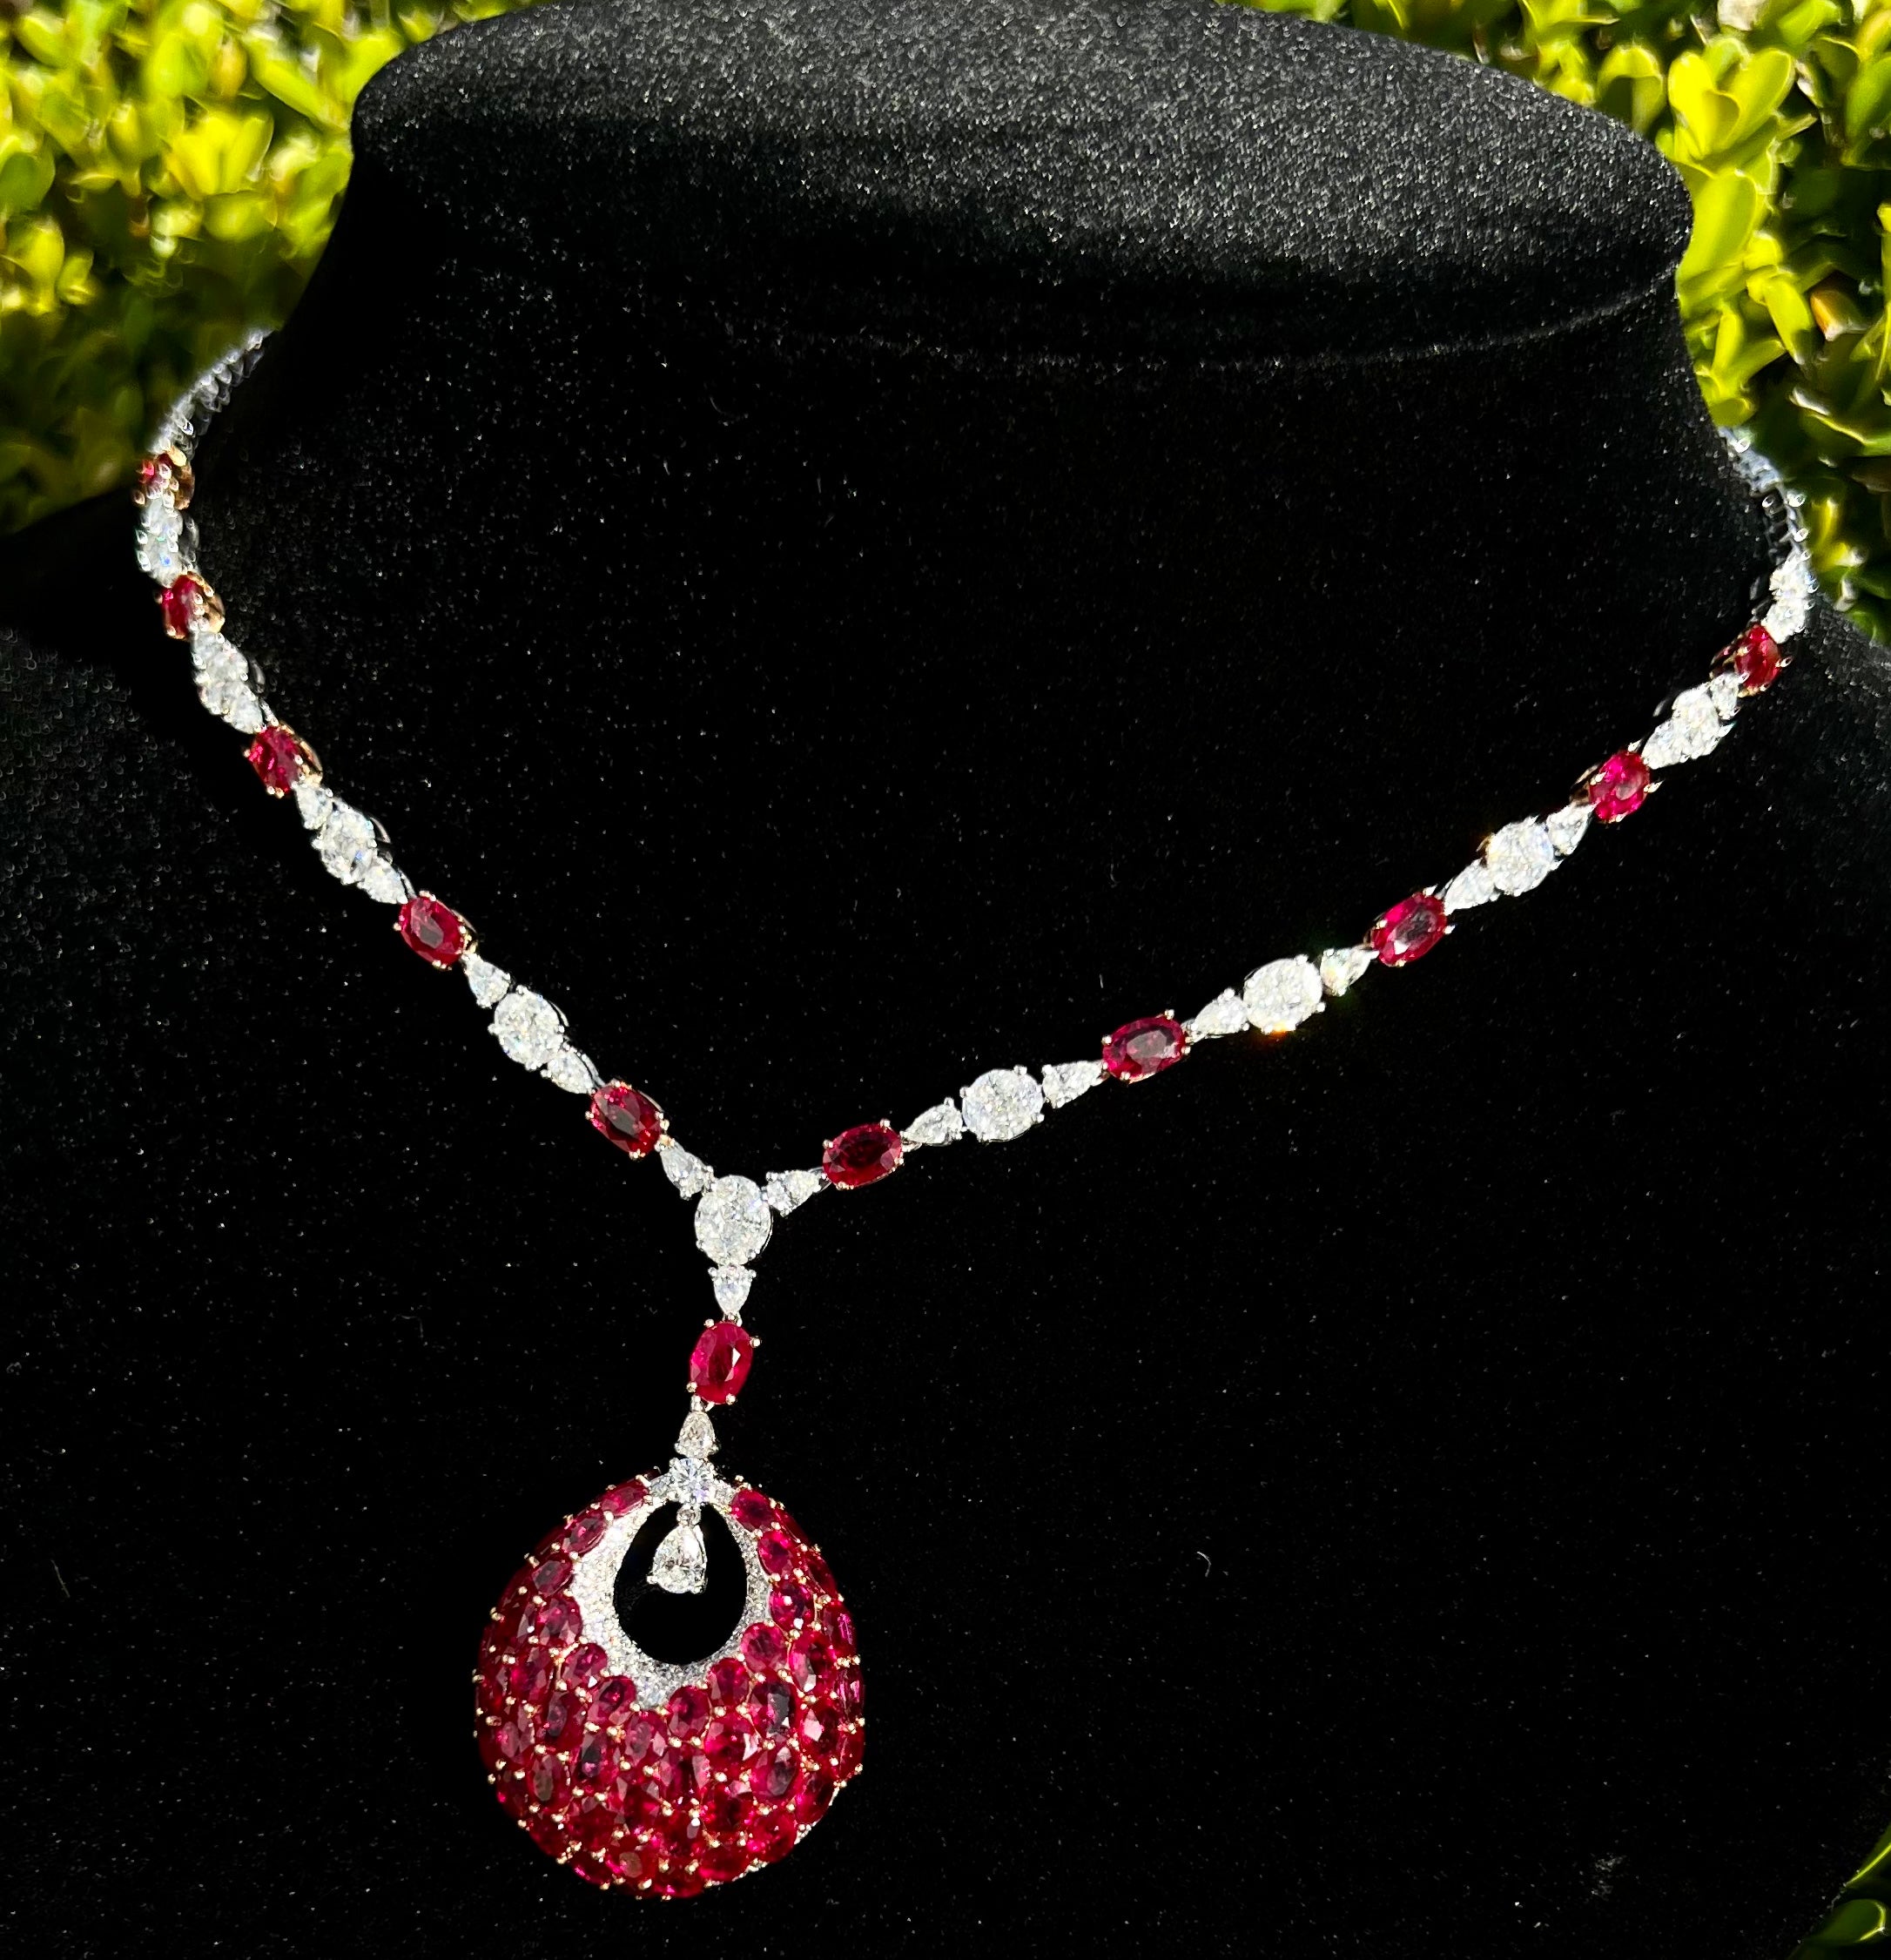 Very opulent, ladies estate 18 karat white gold, 30 carat Burmese ruby and diamond necklace features the finest quality Burmese rubies and D color white sparkling diamonds. In the center of the necklace, an elegant open circular pear drop dangles